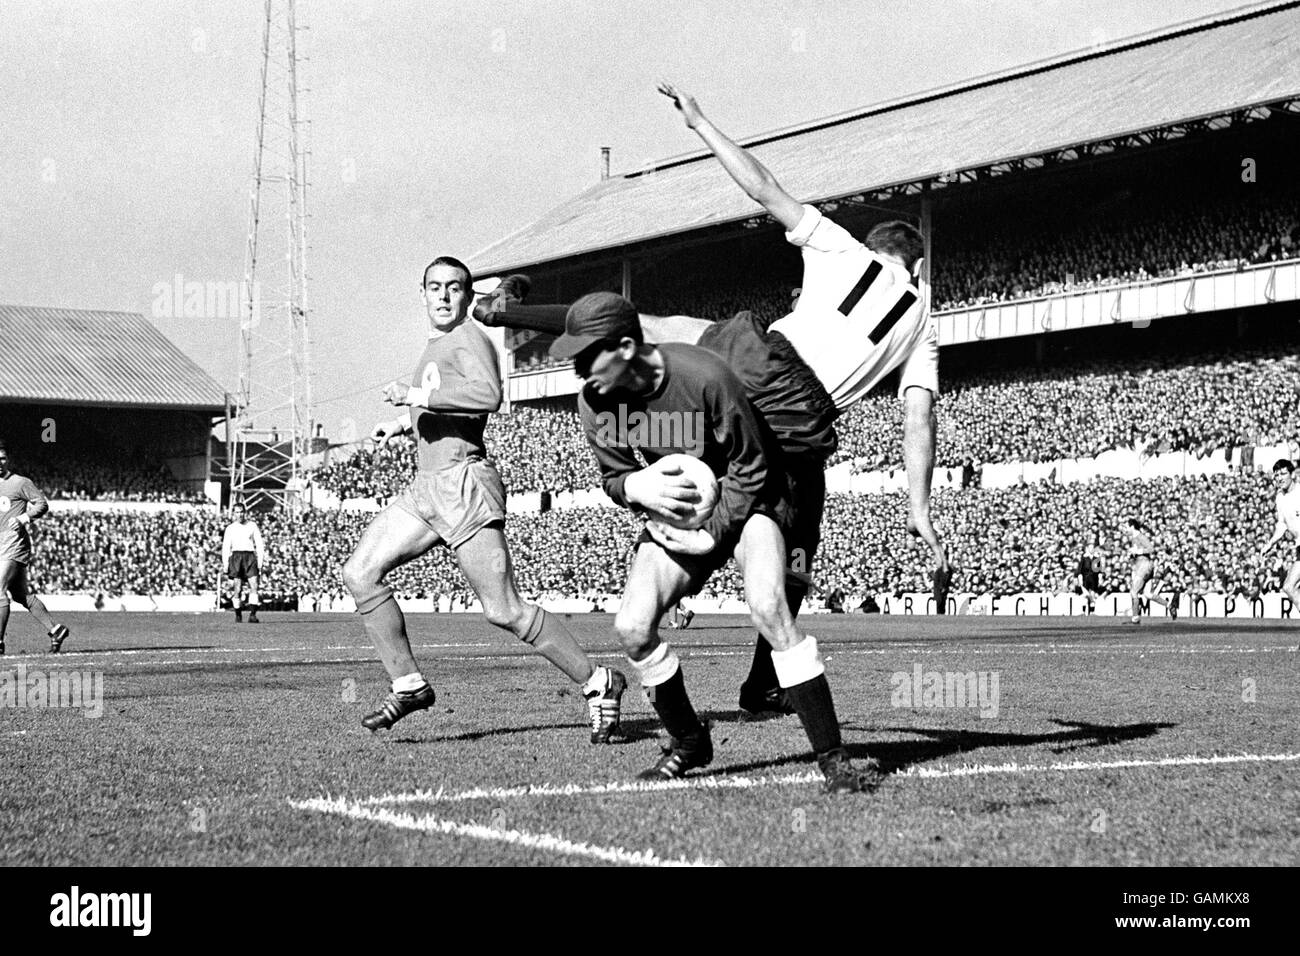 (L-R) Liverpool's Ian St John looks on as Tottenham Hotspur goalkeeper Bill Brown gathers the ball under pressure from his own teammate, Keith Weller Stock Photo